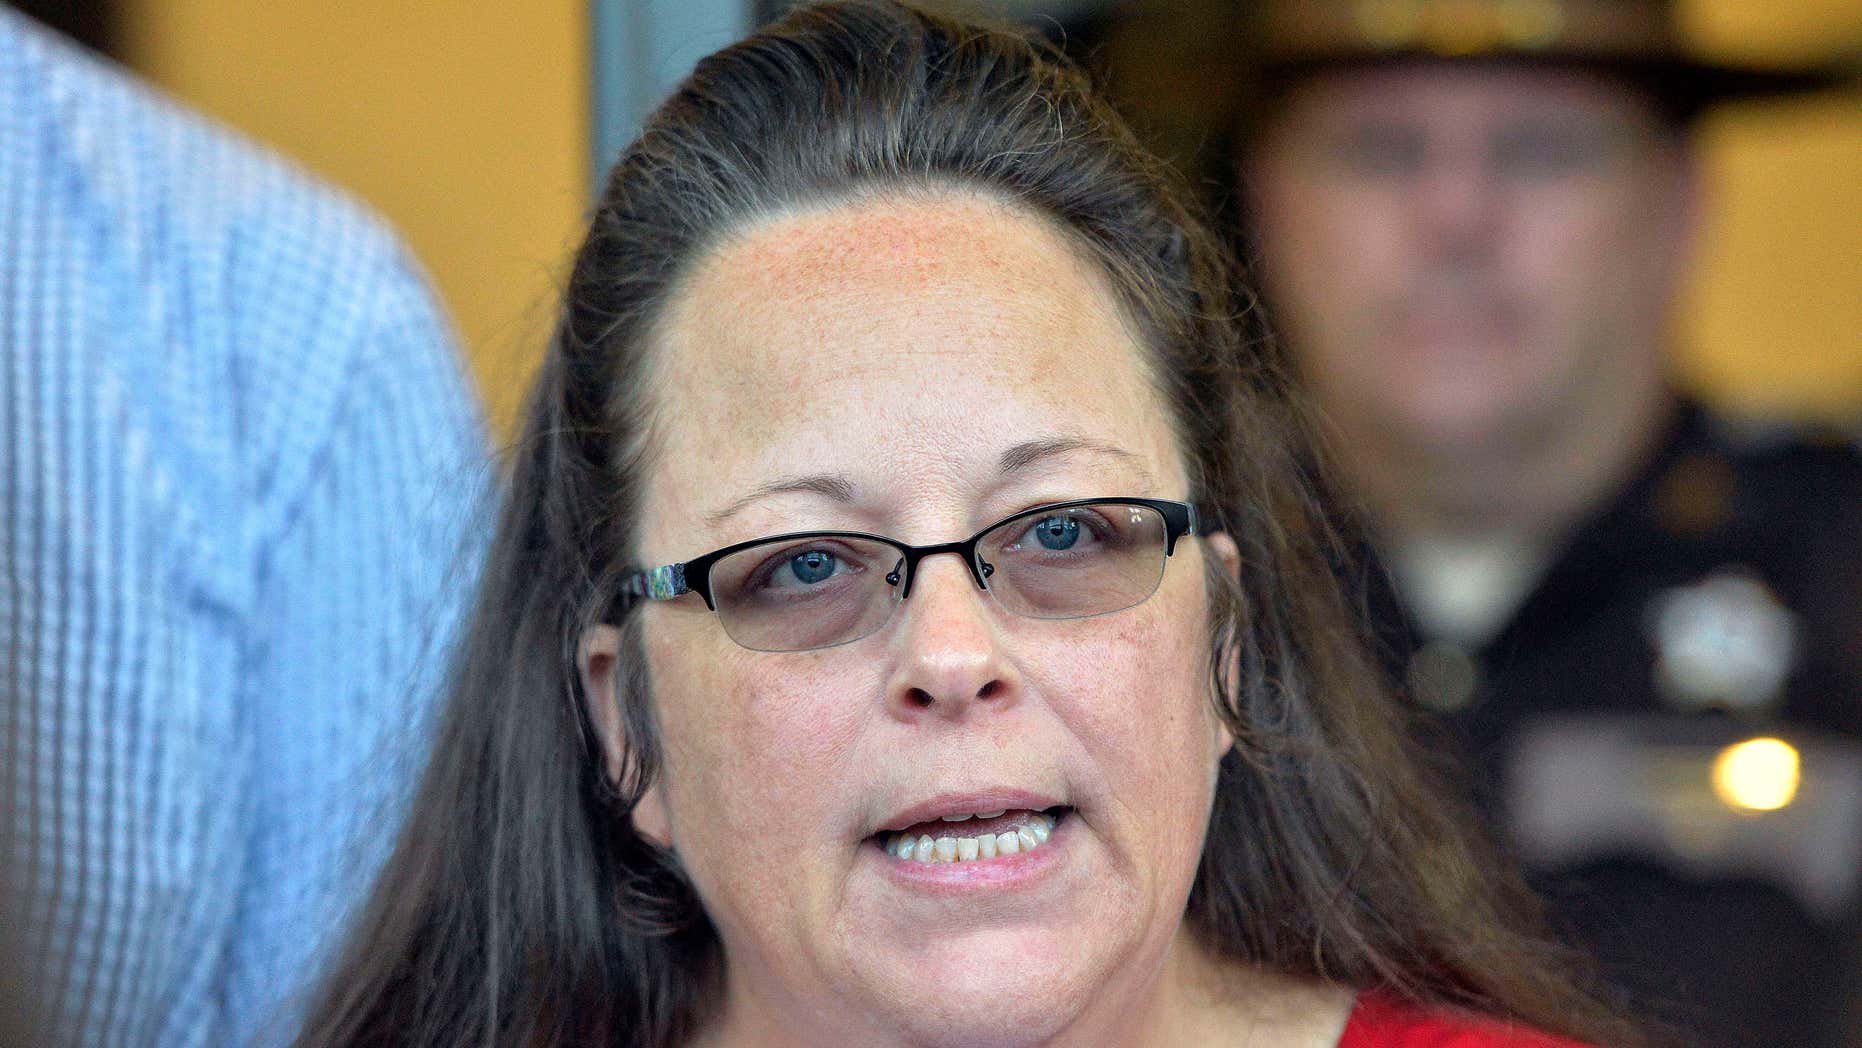 Kim Davis should pay legal fees for gay couples who sued, Kentucky governor